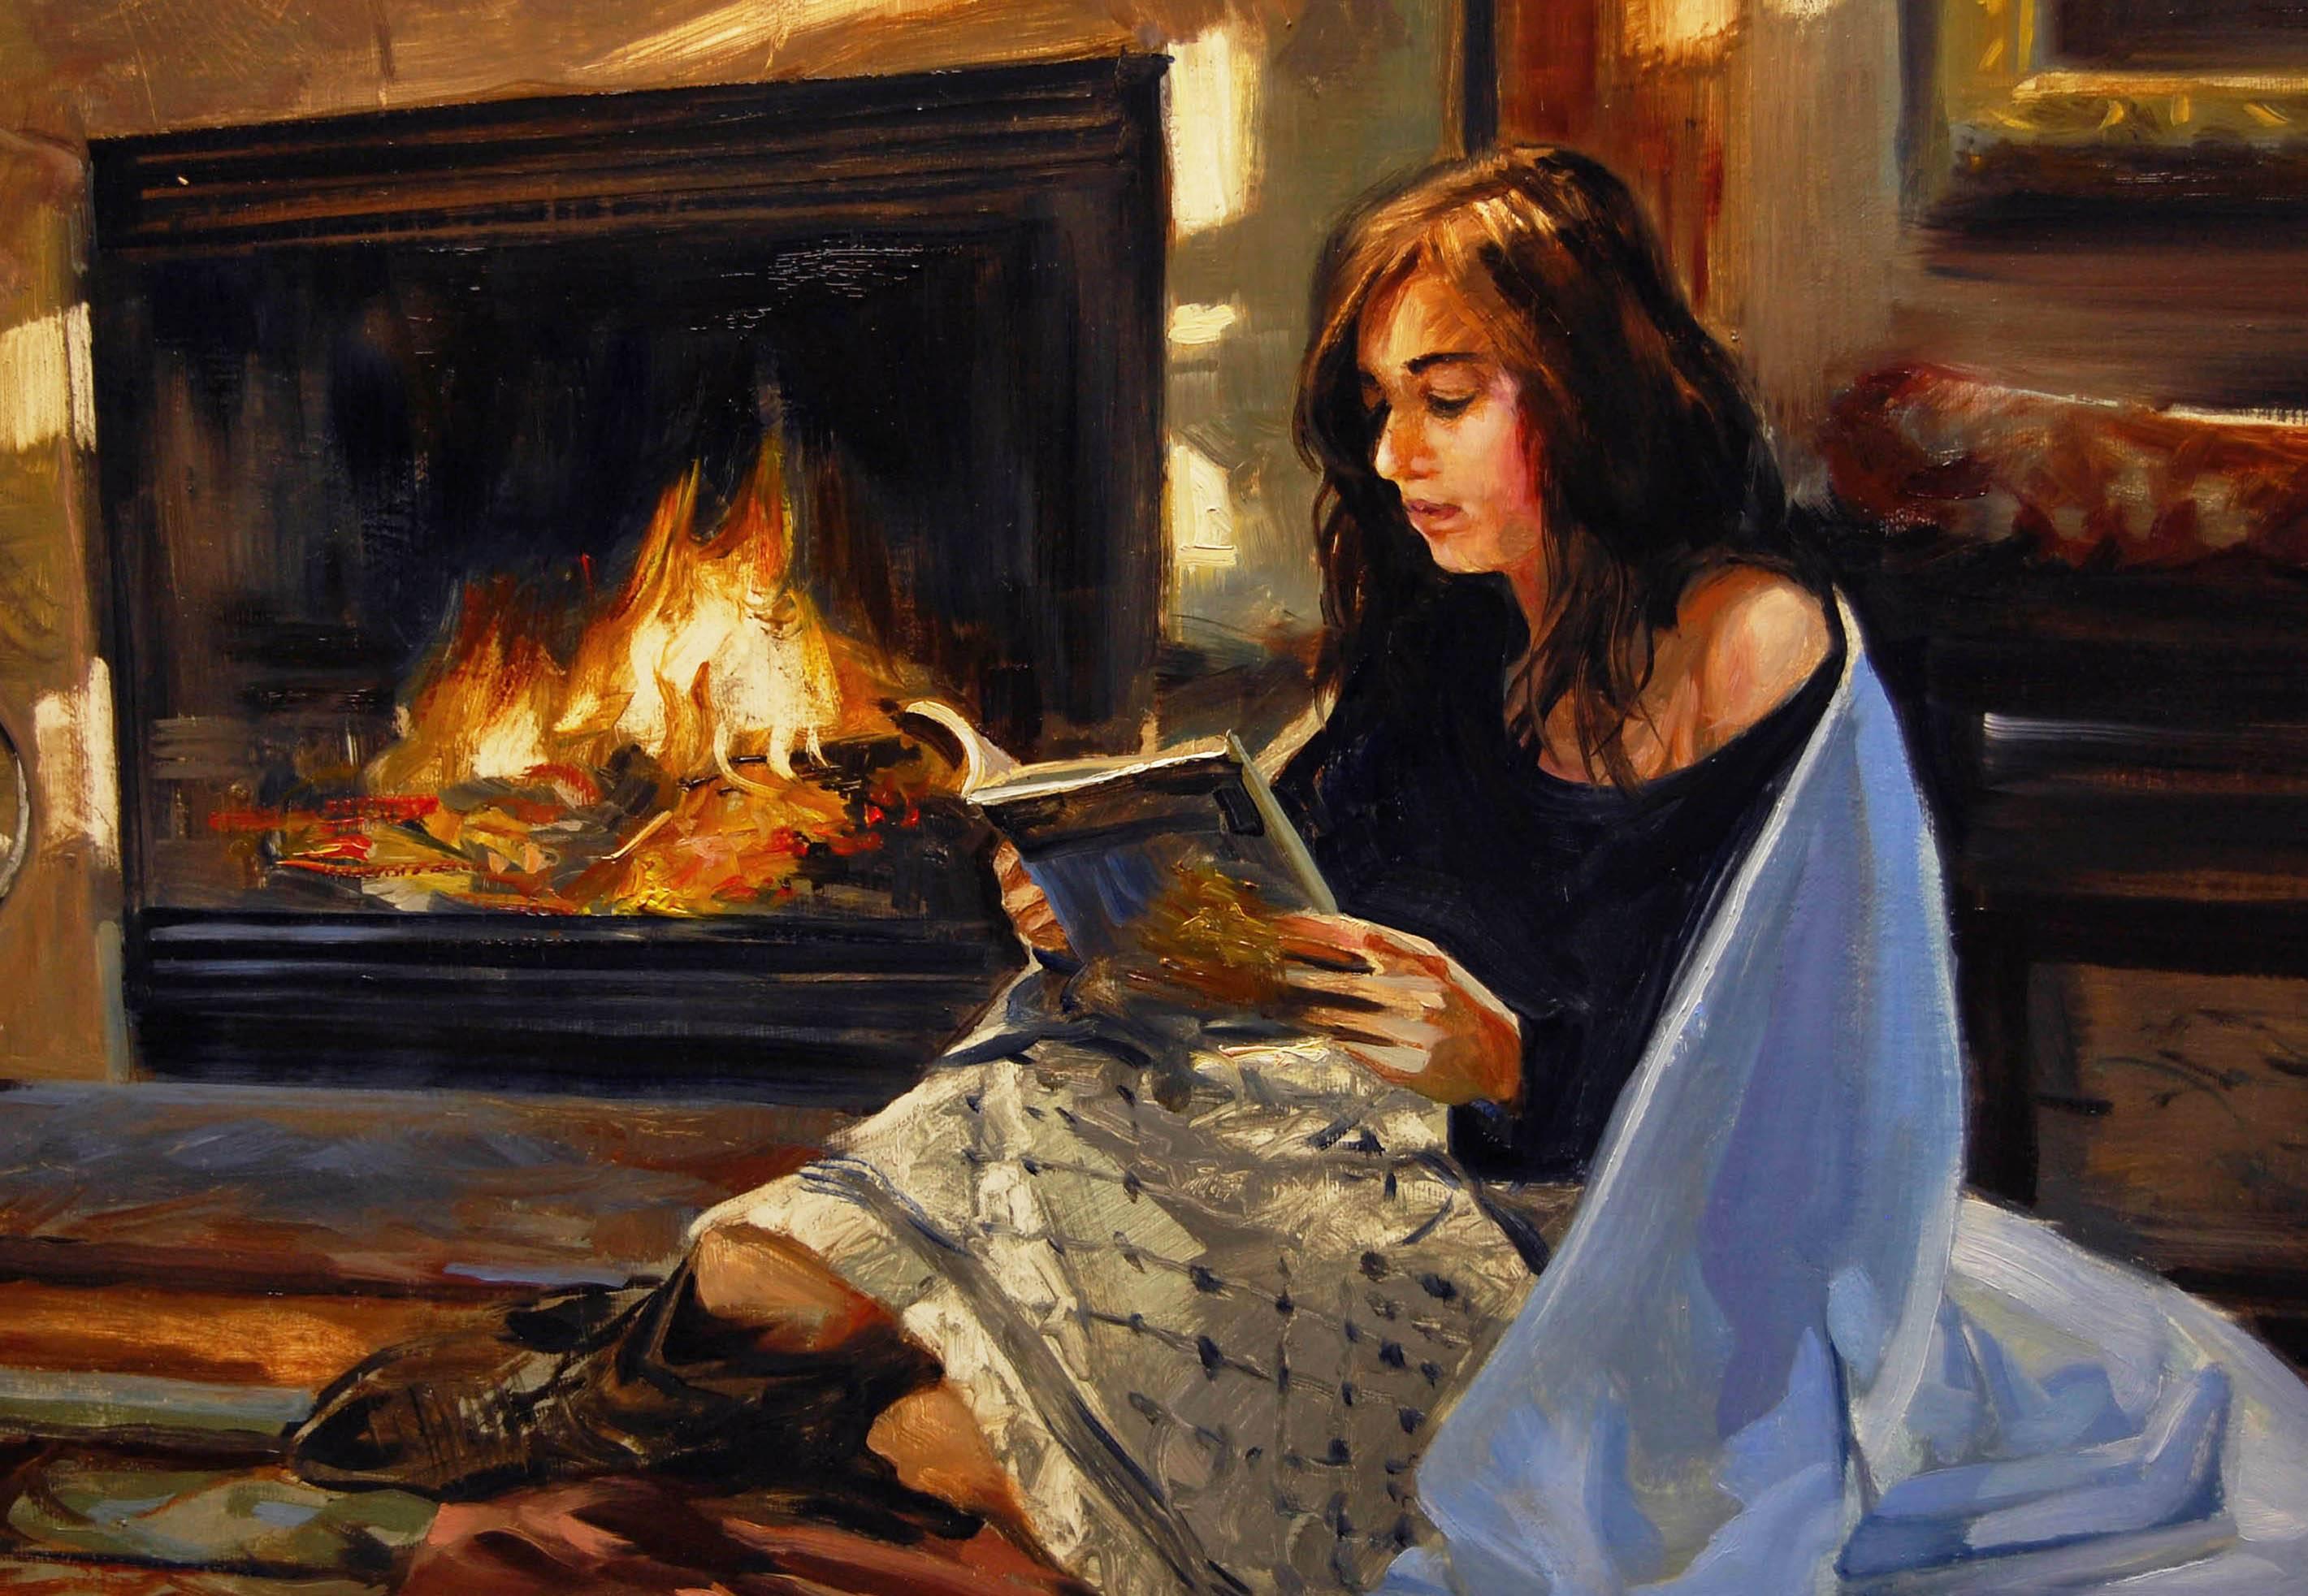 <p>Artist Comments<br />To me, few things compare to a quiet time of contemplation and reading by a fire. The weather outside is bitterly cold. The youthful model is situated in my living room in front of the hearth and fireplace I hand crafted many